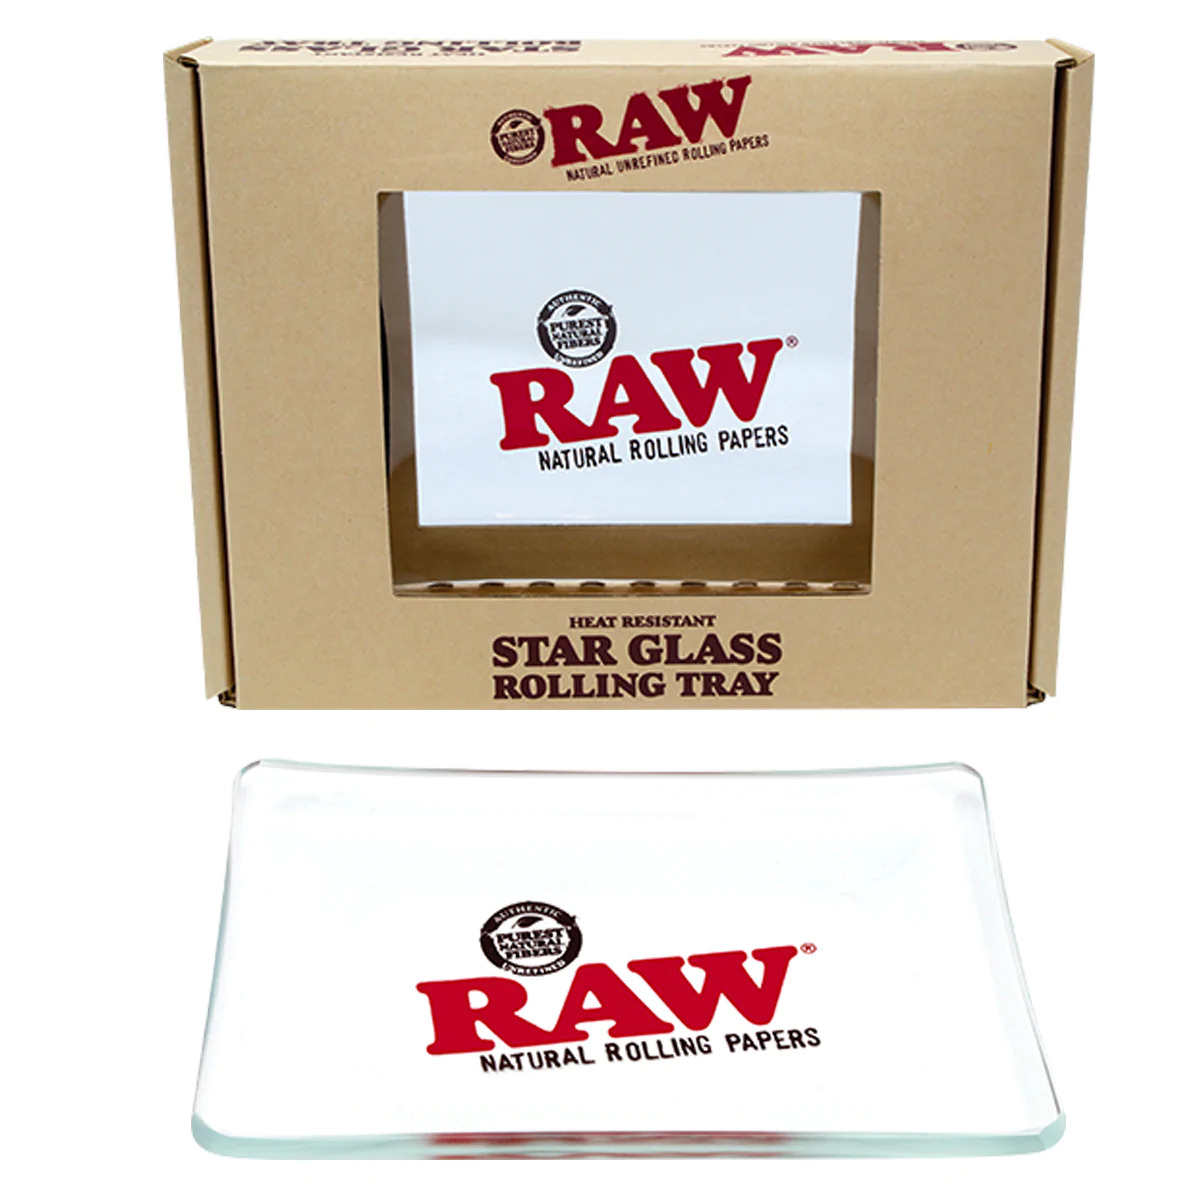 RAW Rolling Papers STAR GLASS ROLLING TRAY - Limited Edition - SIZE: 6